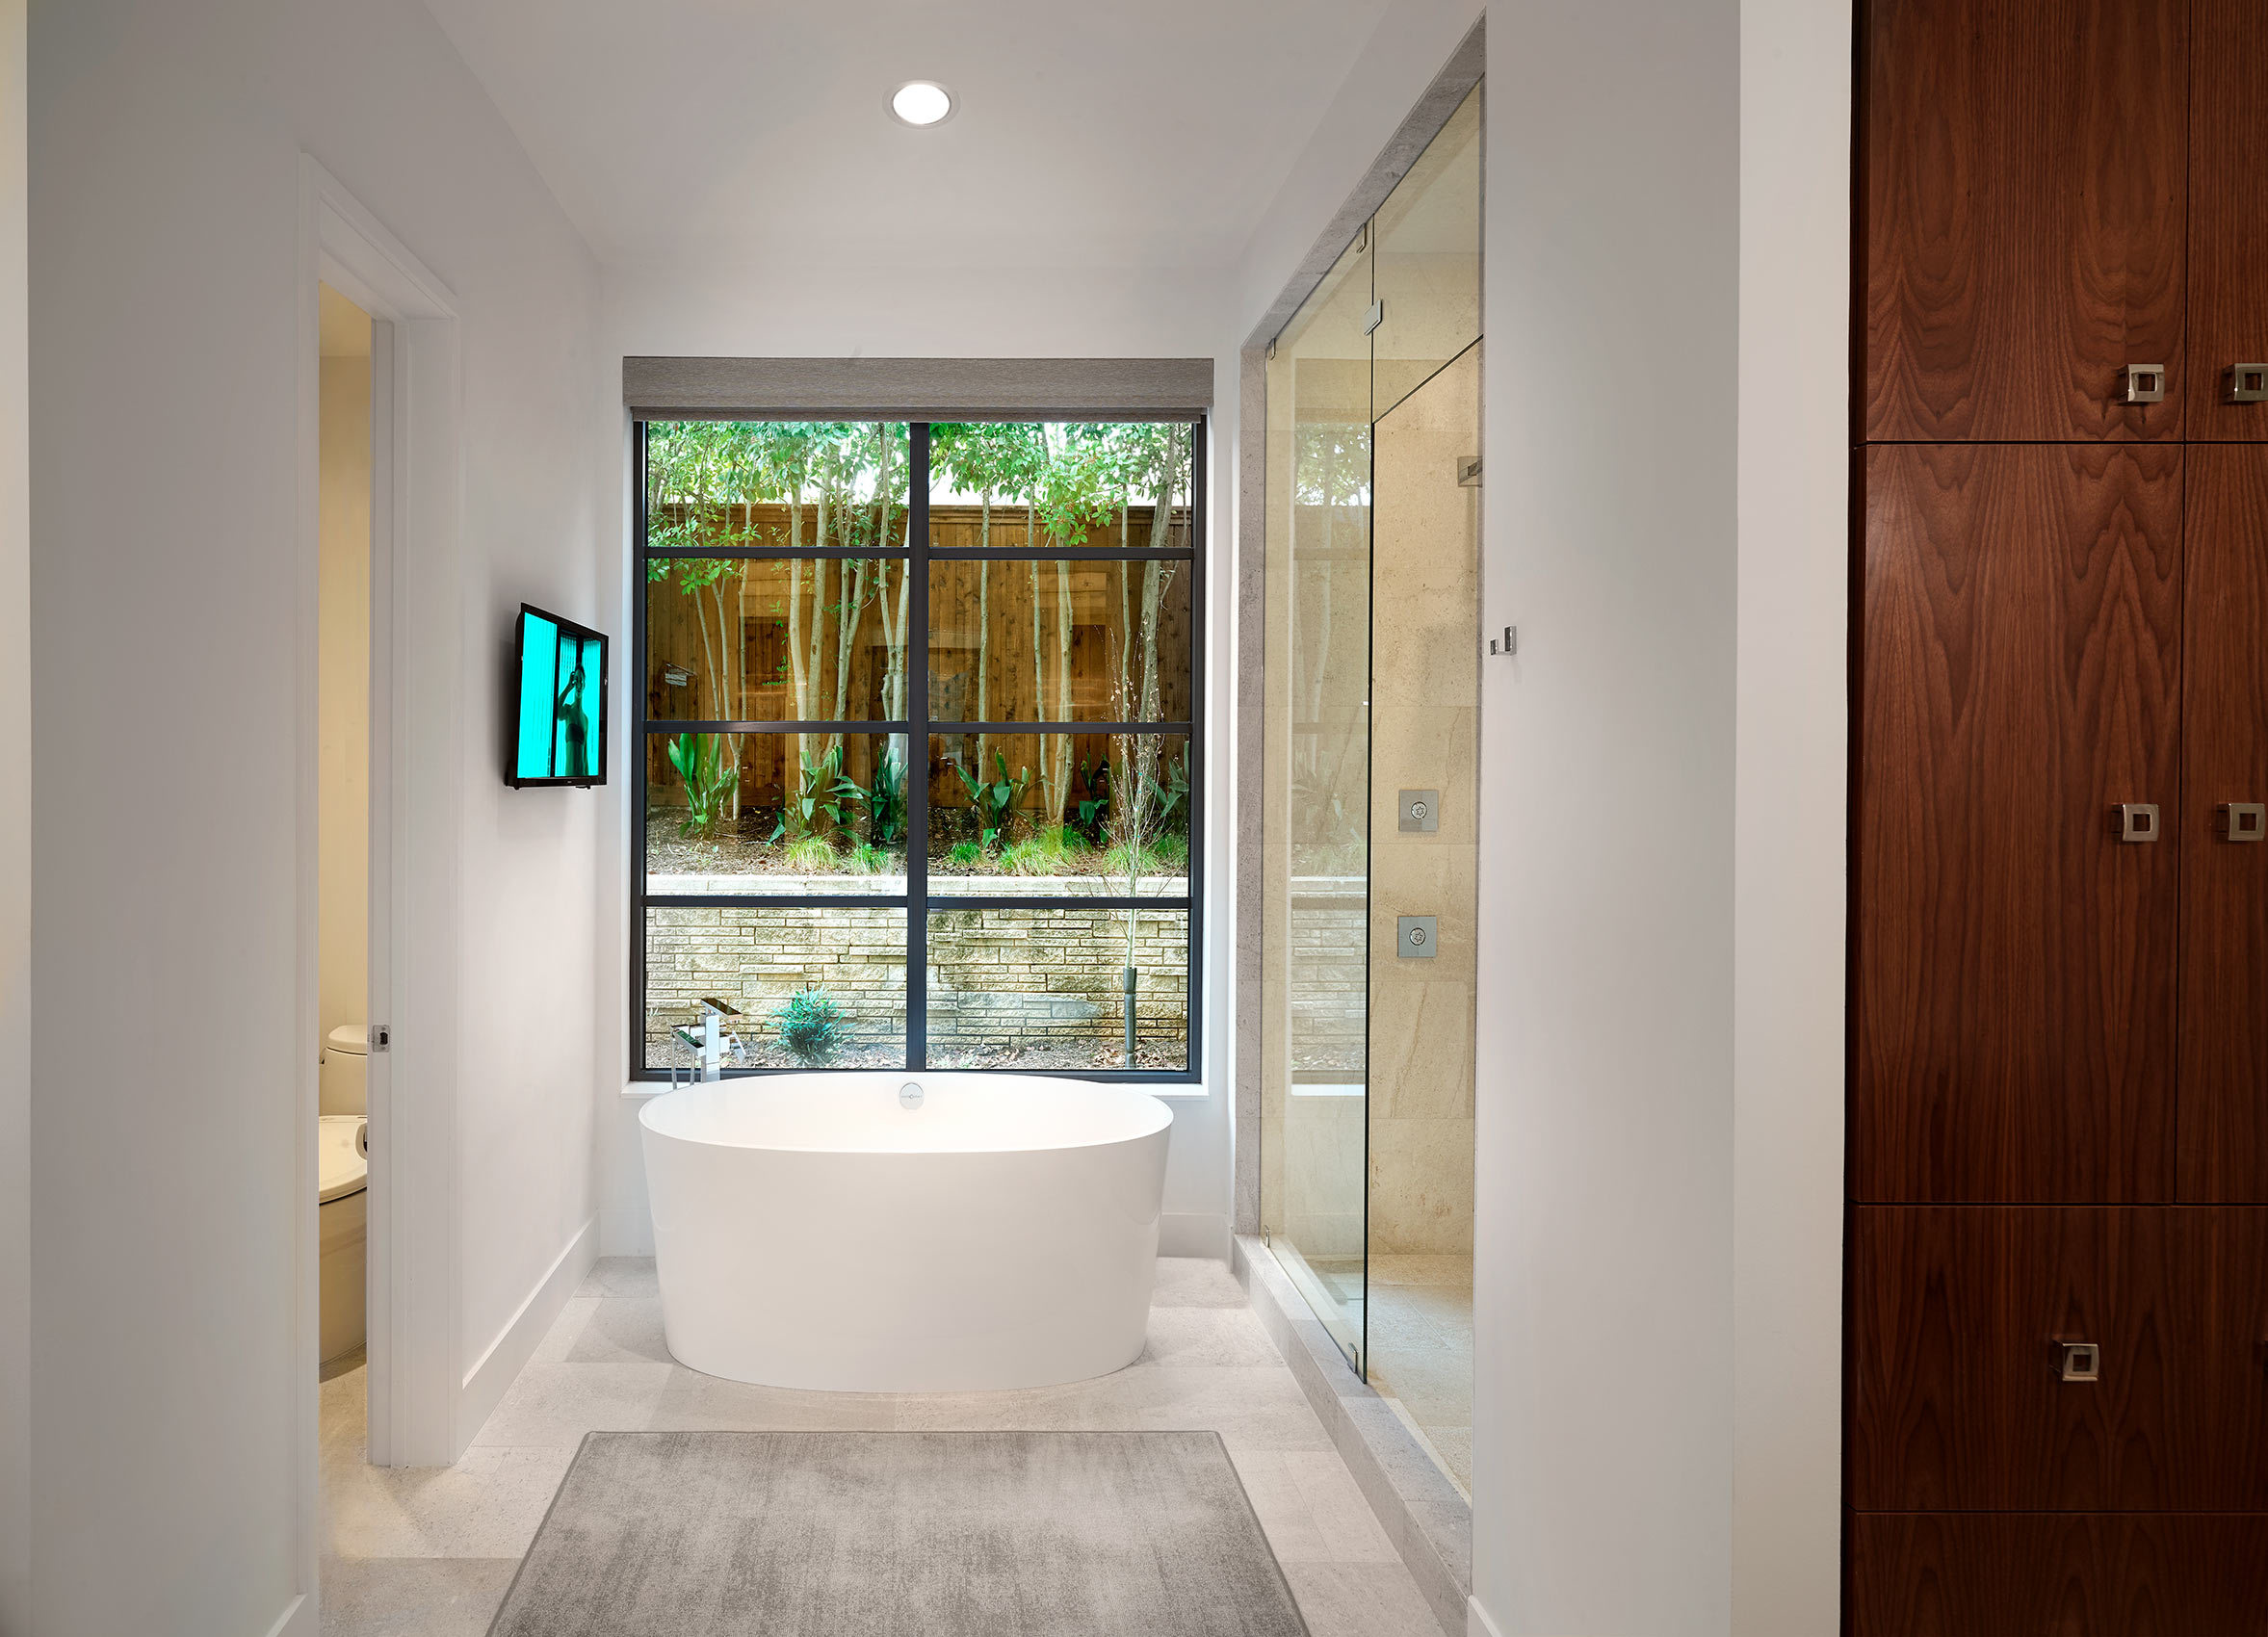 bath fixtures and design |  bathroom spaces and lighting |  outdoor views from bath